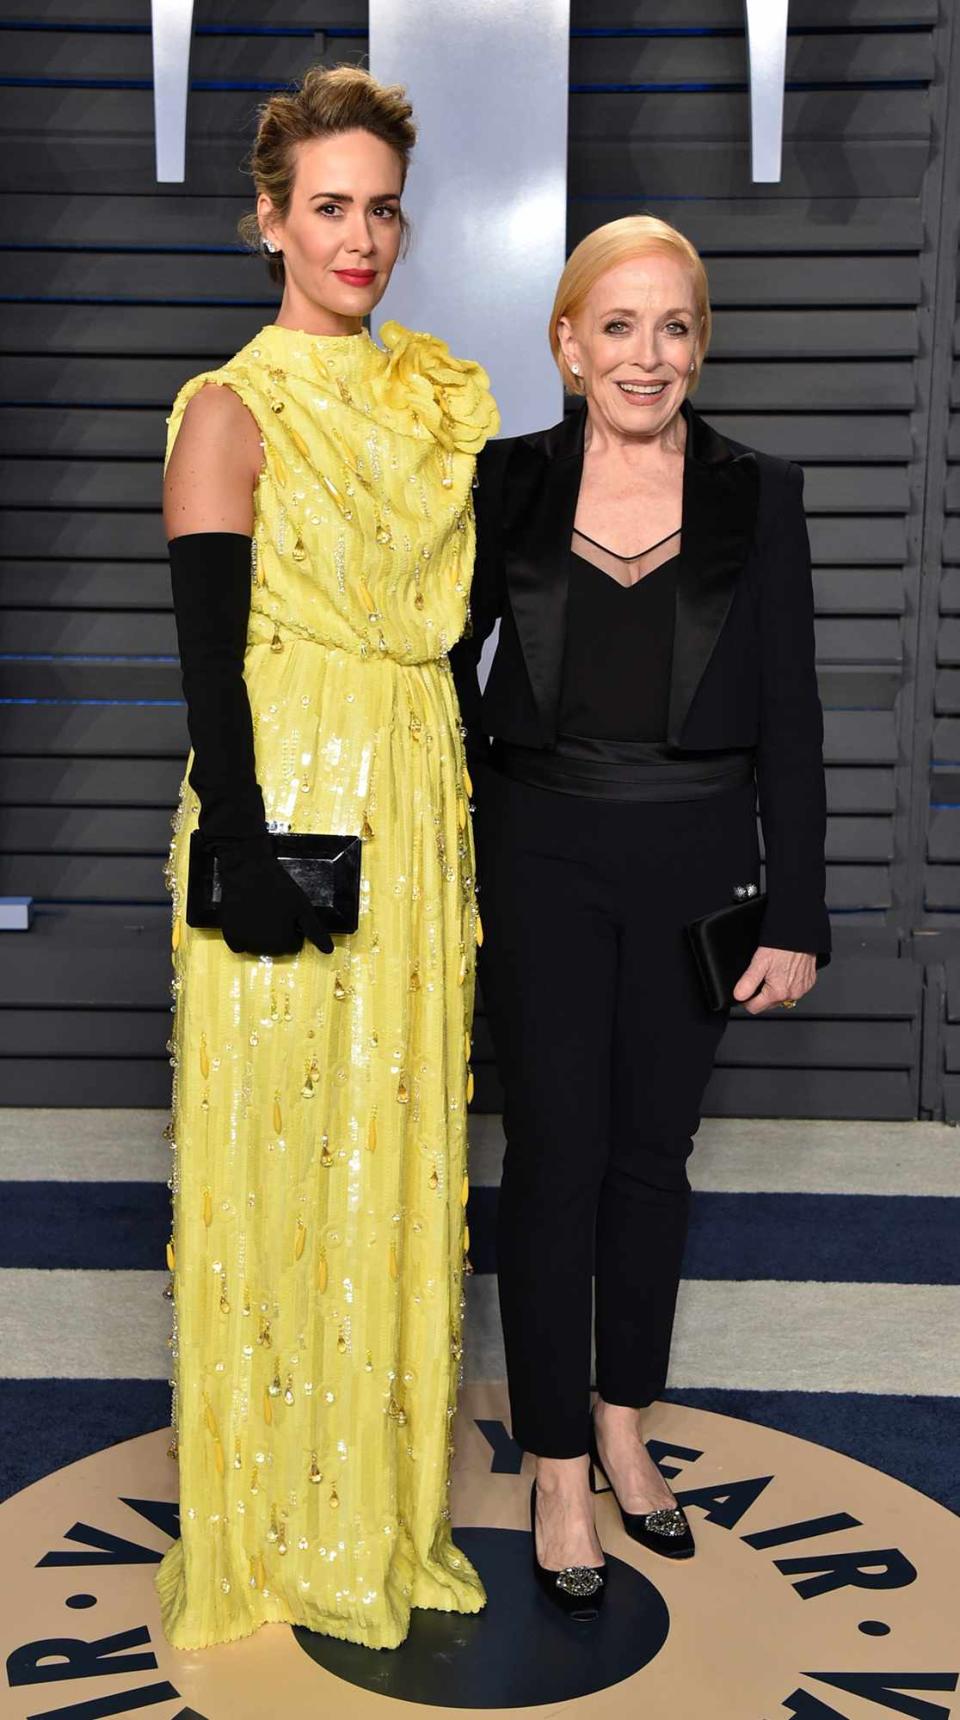 Sarah Paulson (L) and Holland Taylor attend the 2018 Vanity Fair Oscar Party hosted by Radhika Jones at Wallis Annenberg Center for the Performing Arts on March 4, 2018 in Beverly Hills, California